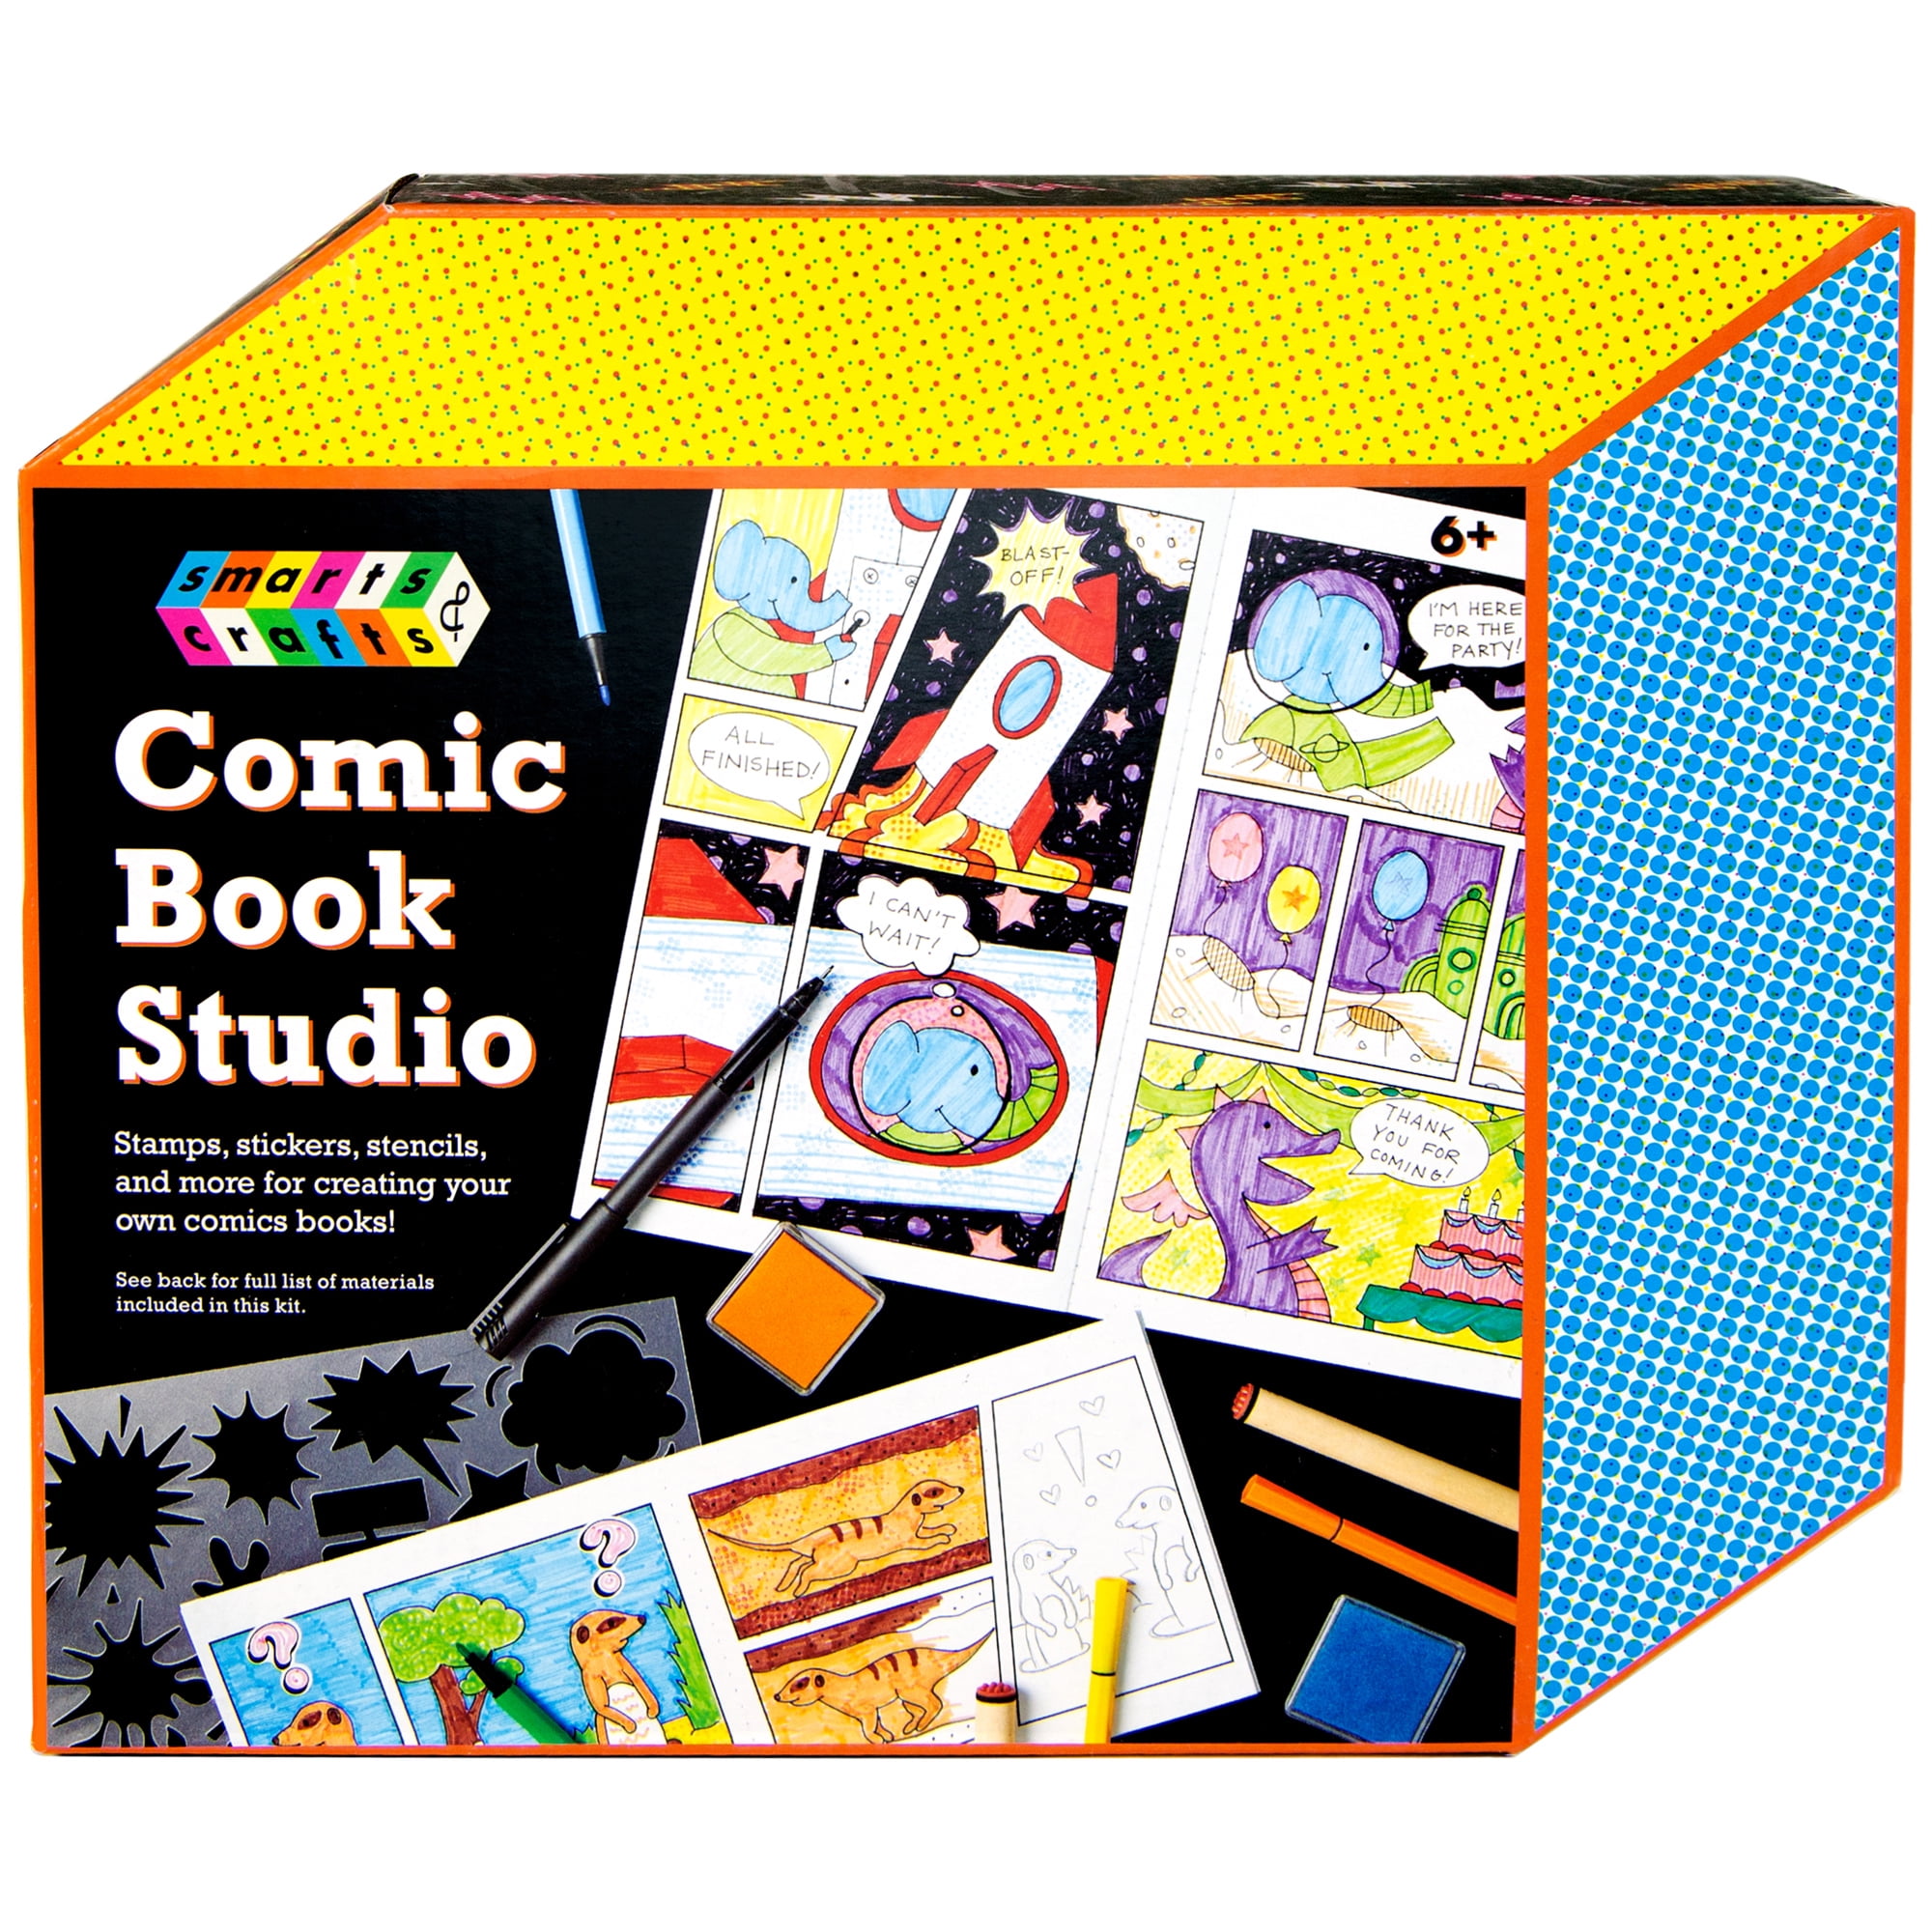 33-Piece Smarts & Crafts Make Your Own Comic Book Studio Kit $5.62 + Free S&H w/ Walmart+ or $35+